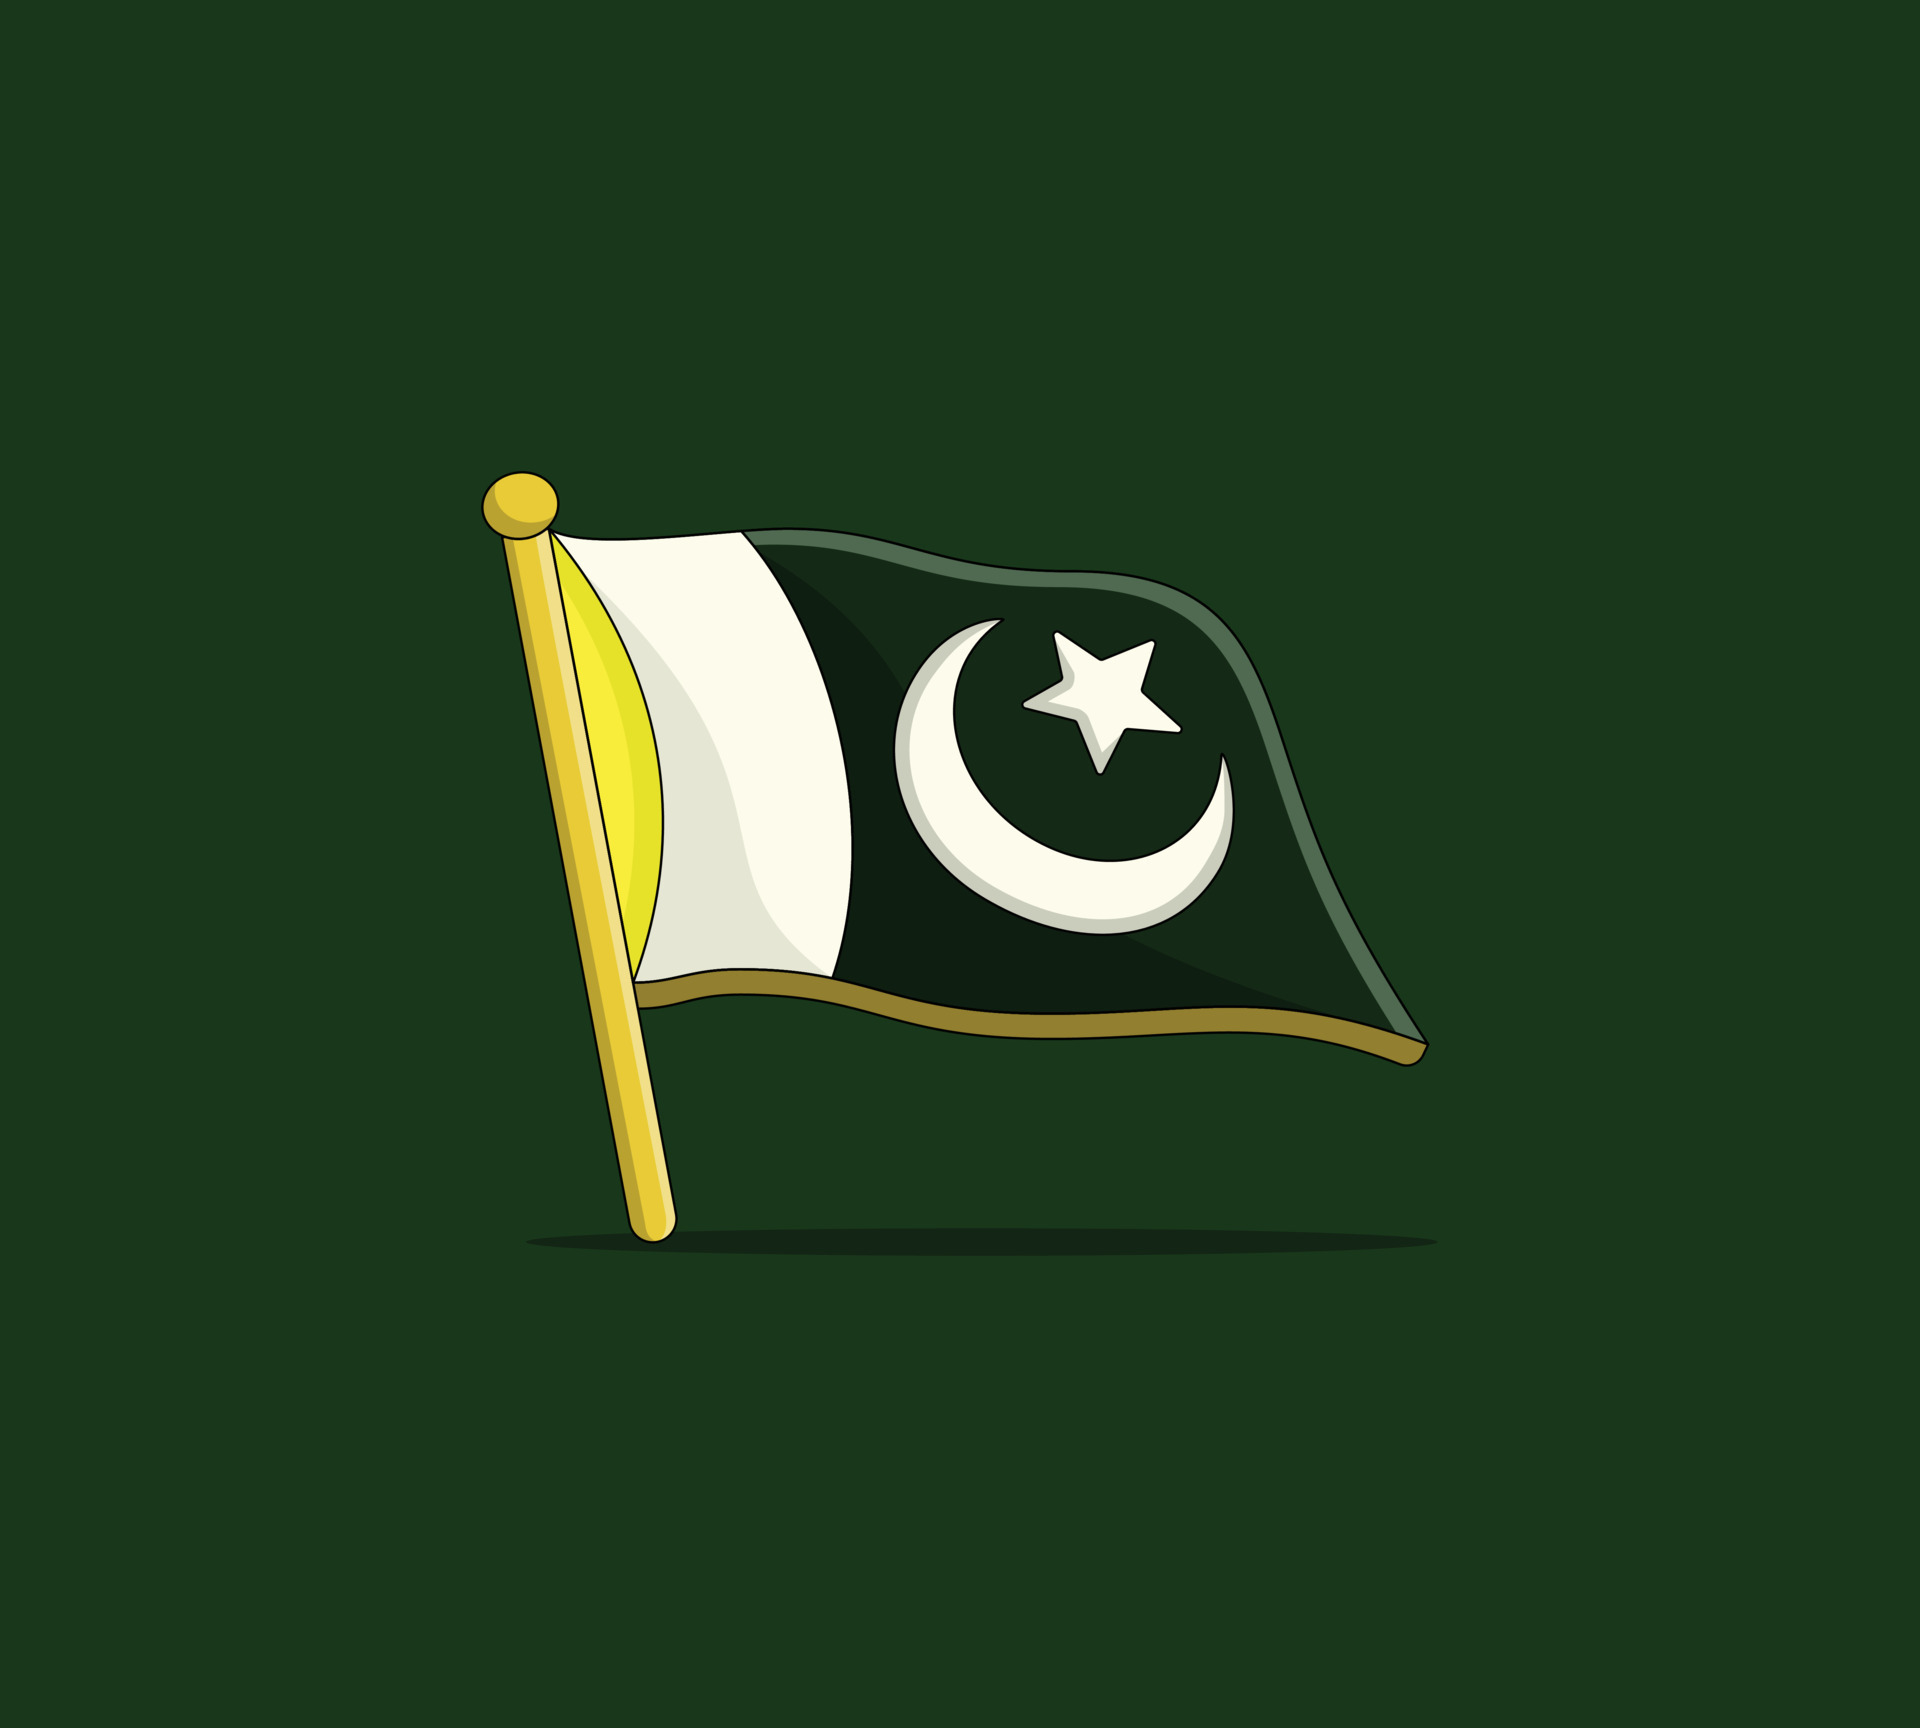 70 Pakistan Independence Day Stock Photos Pictures  RoyaltyFree Images   iStock  Pakistani flag Independence day pakistan Pakistani ethnicity